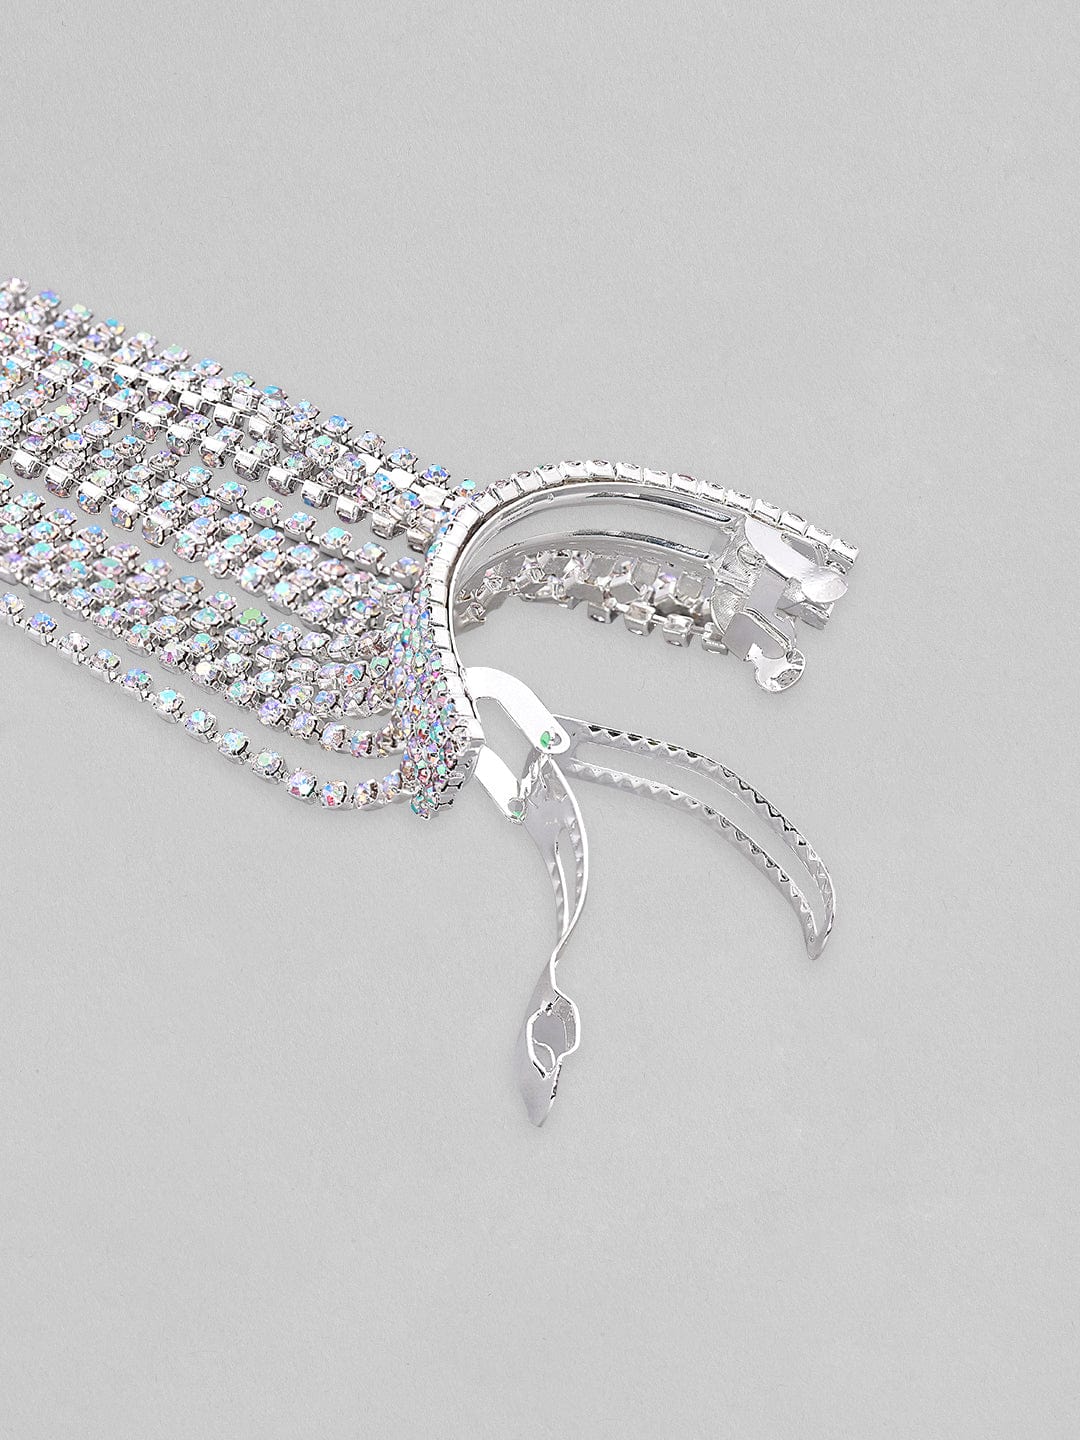 Rubans Voguish Silver Shimmery Long Fringe Rubberband Hair Accessory